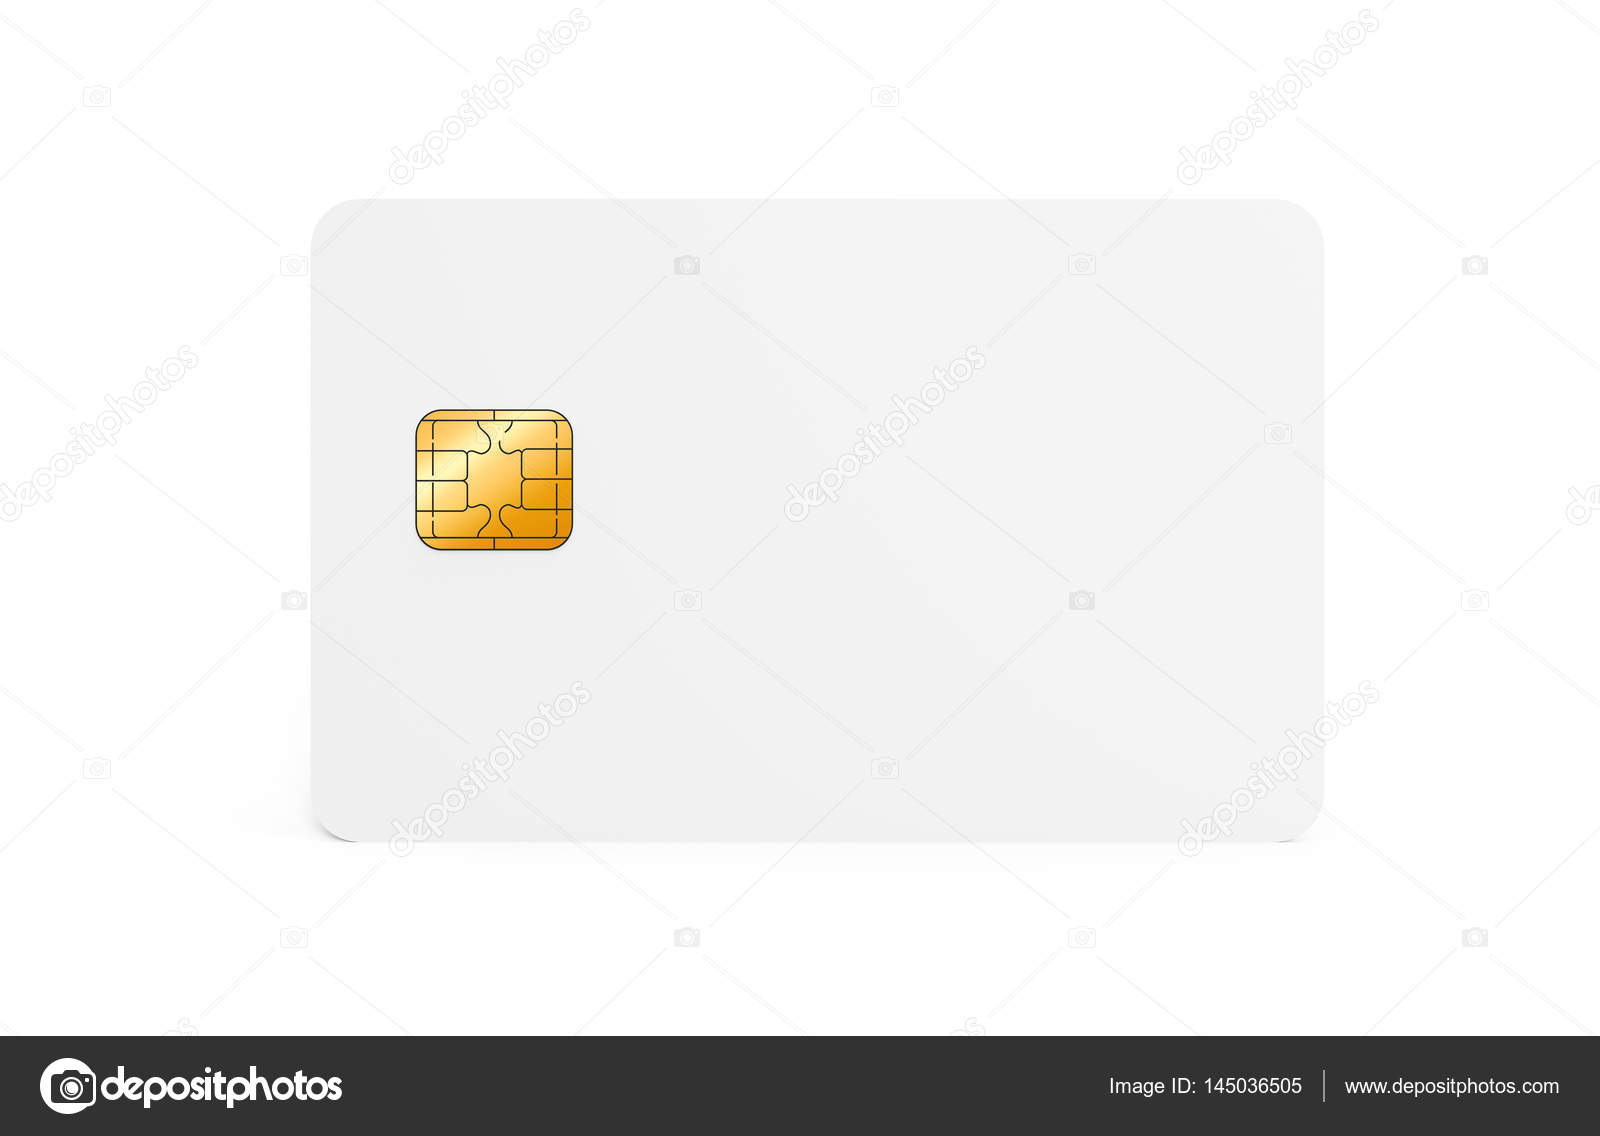 Blank Credit Card Template Stock Photo By C Hstrongart 145036505